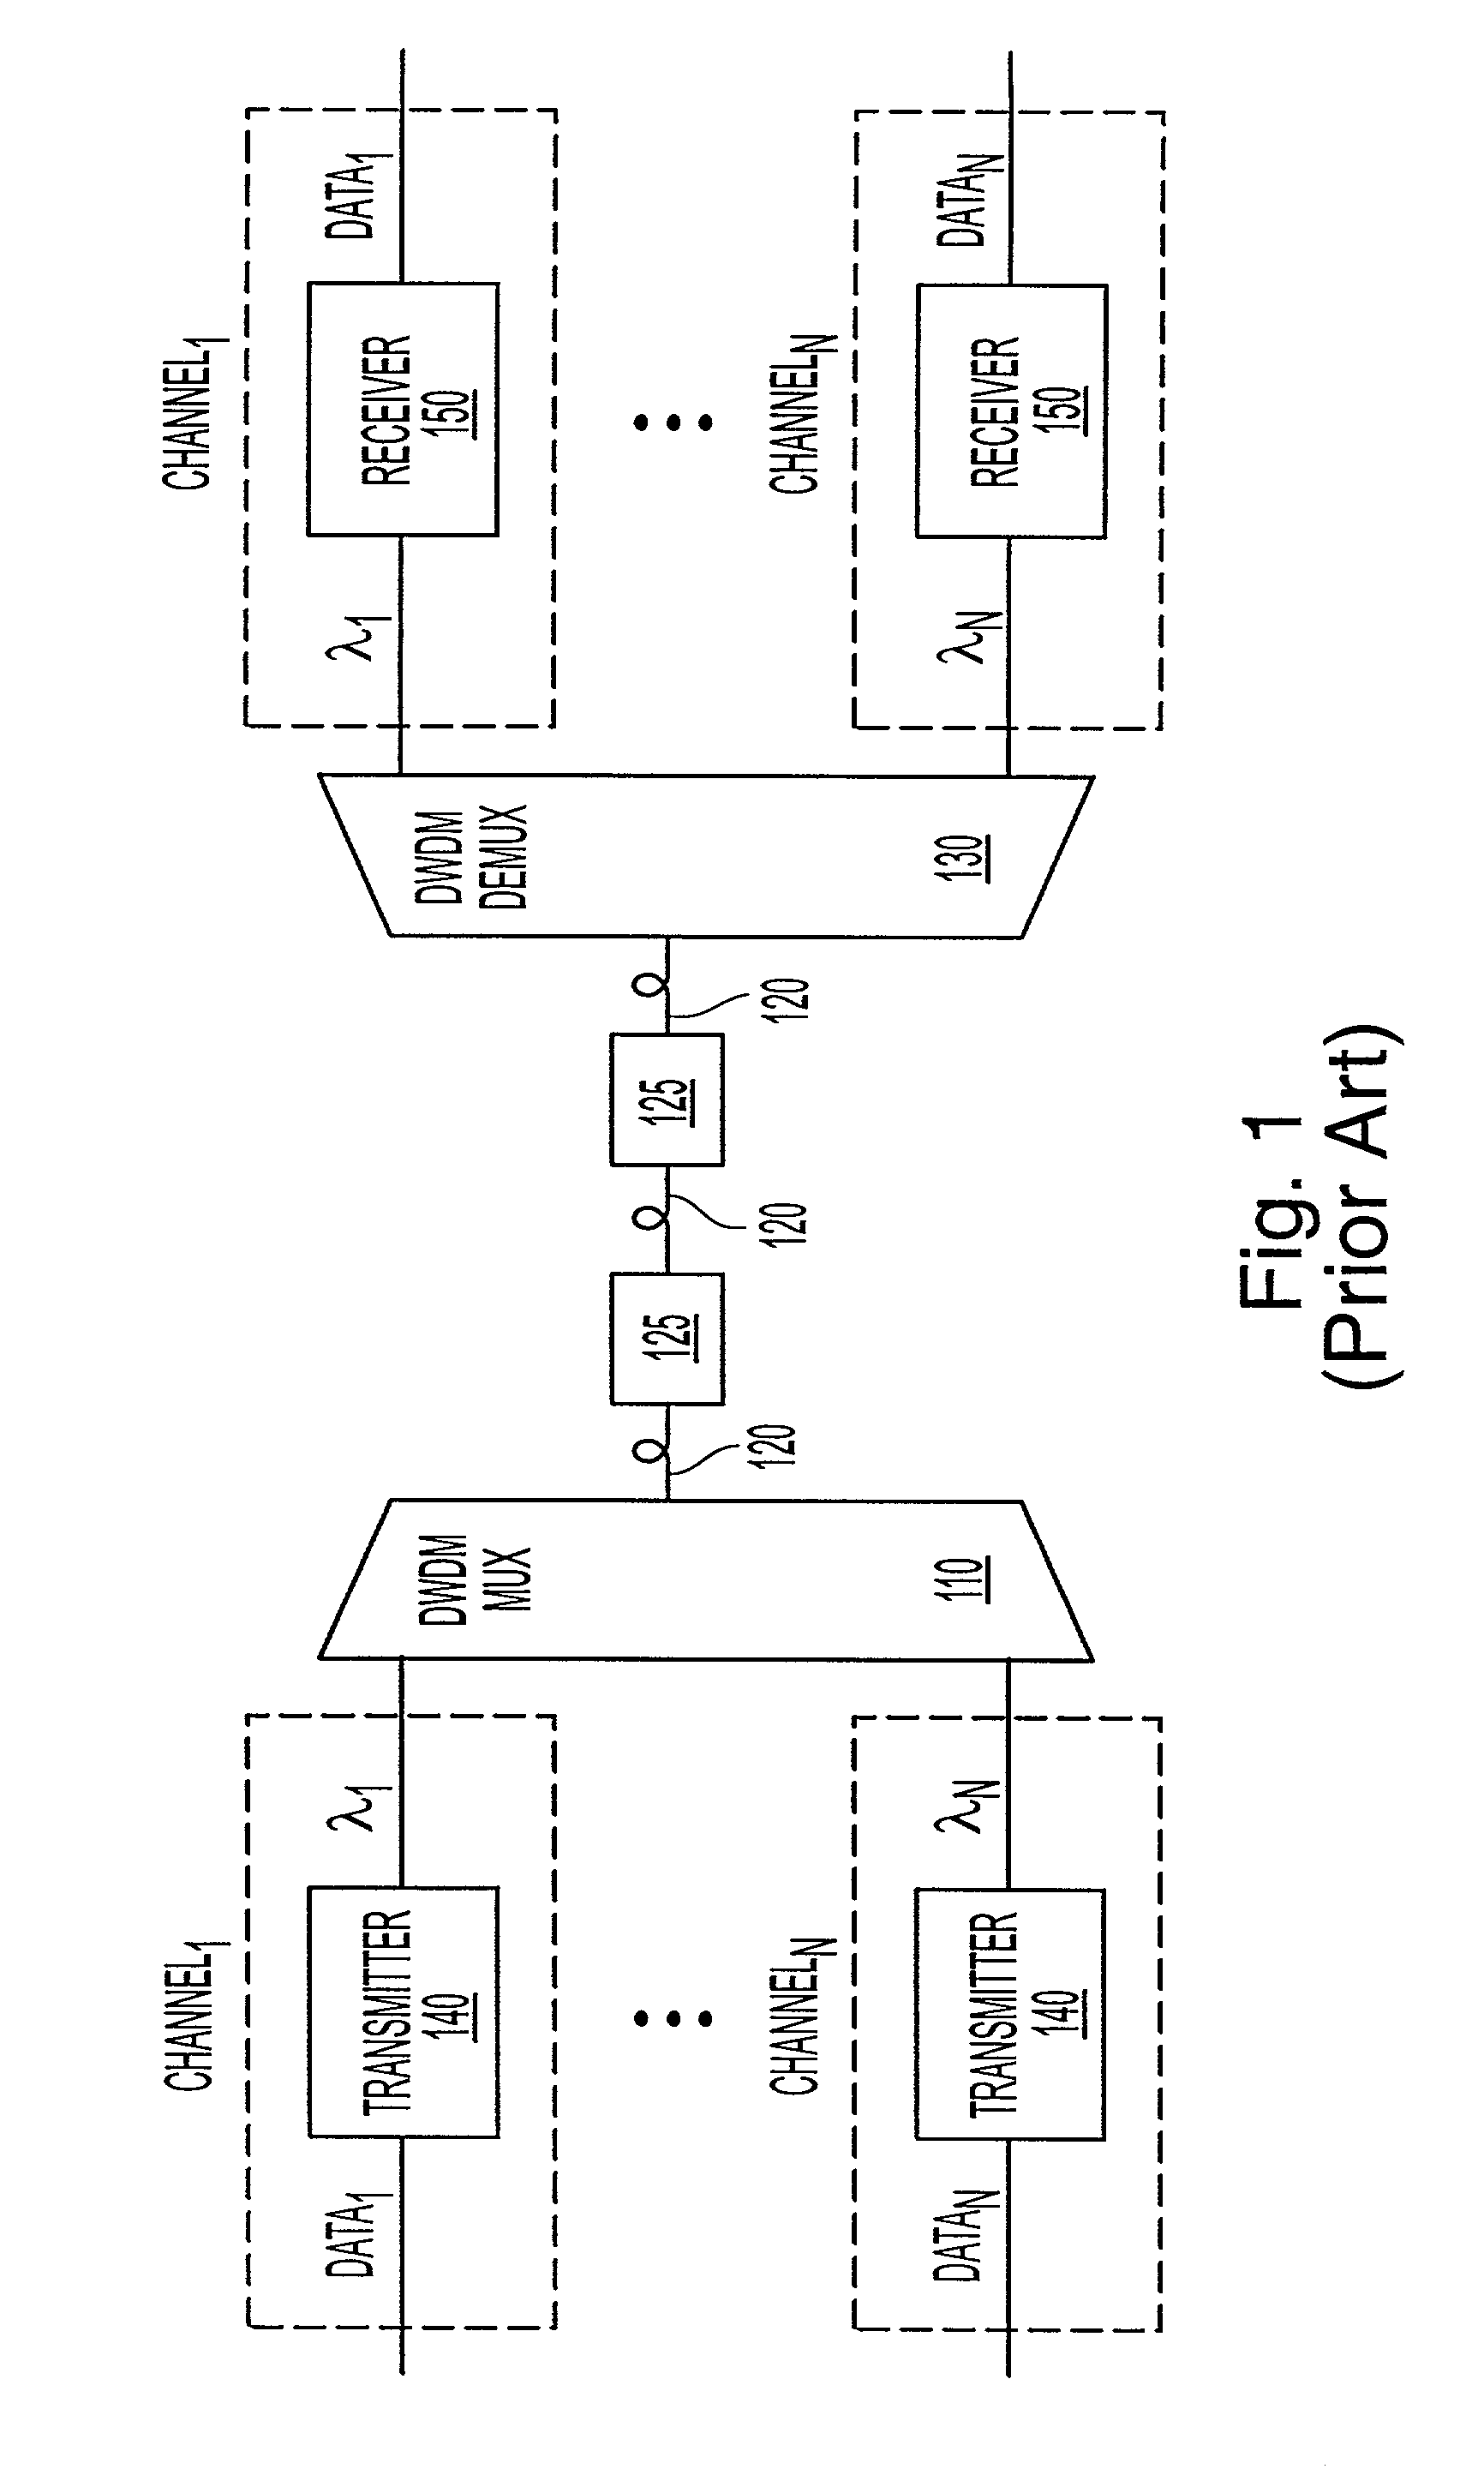 System and method for orthogonal frequency division multiplexed optical communication